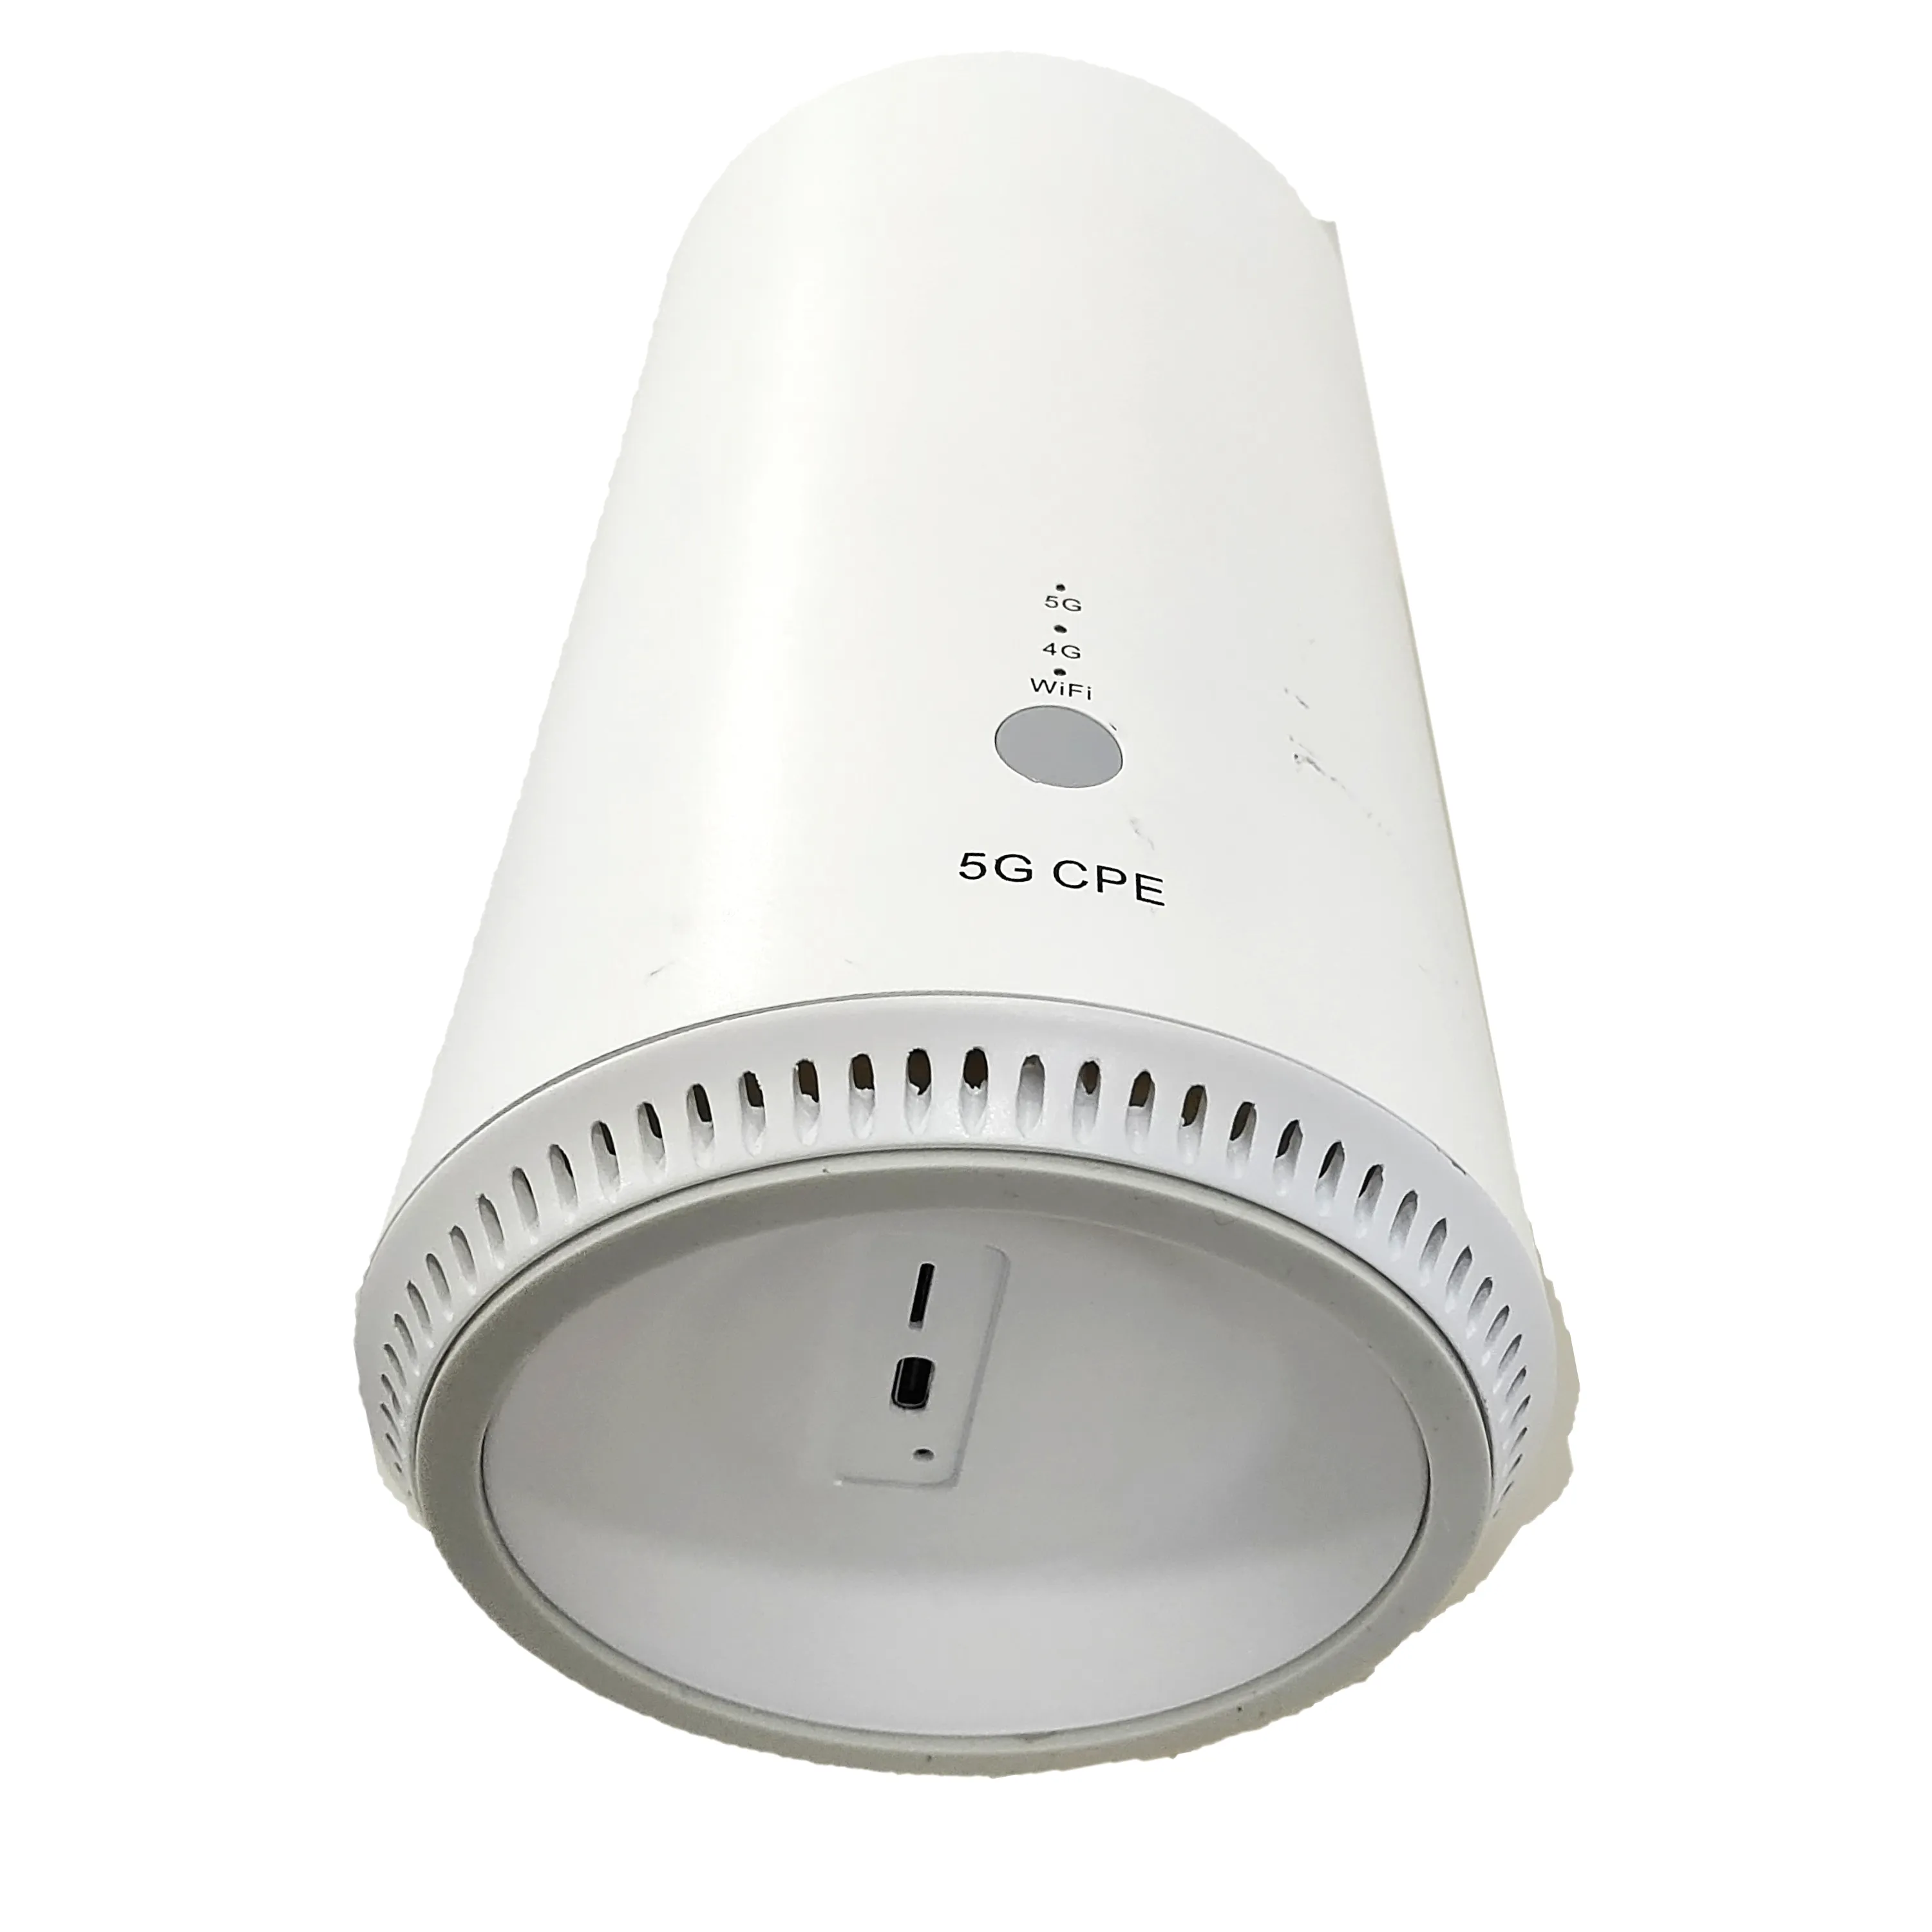 HDR300 new item 5G NR band CPE dual-band Gigabit indoor high-speed WIFI 6 2.4GHZ &5GHZ dual frequency